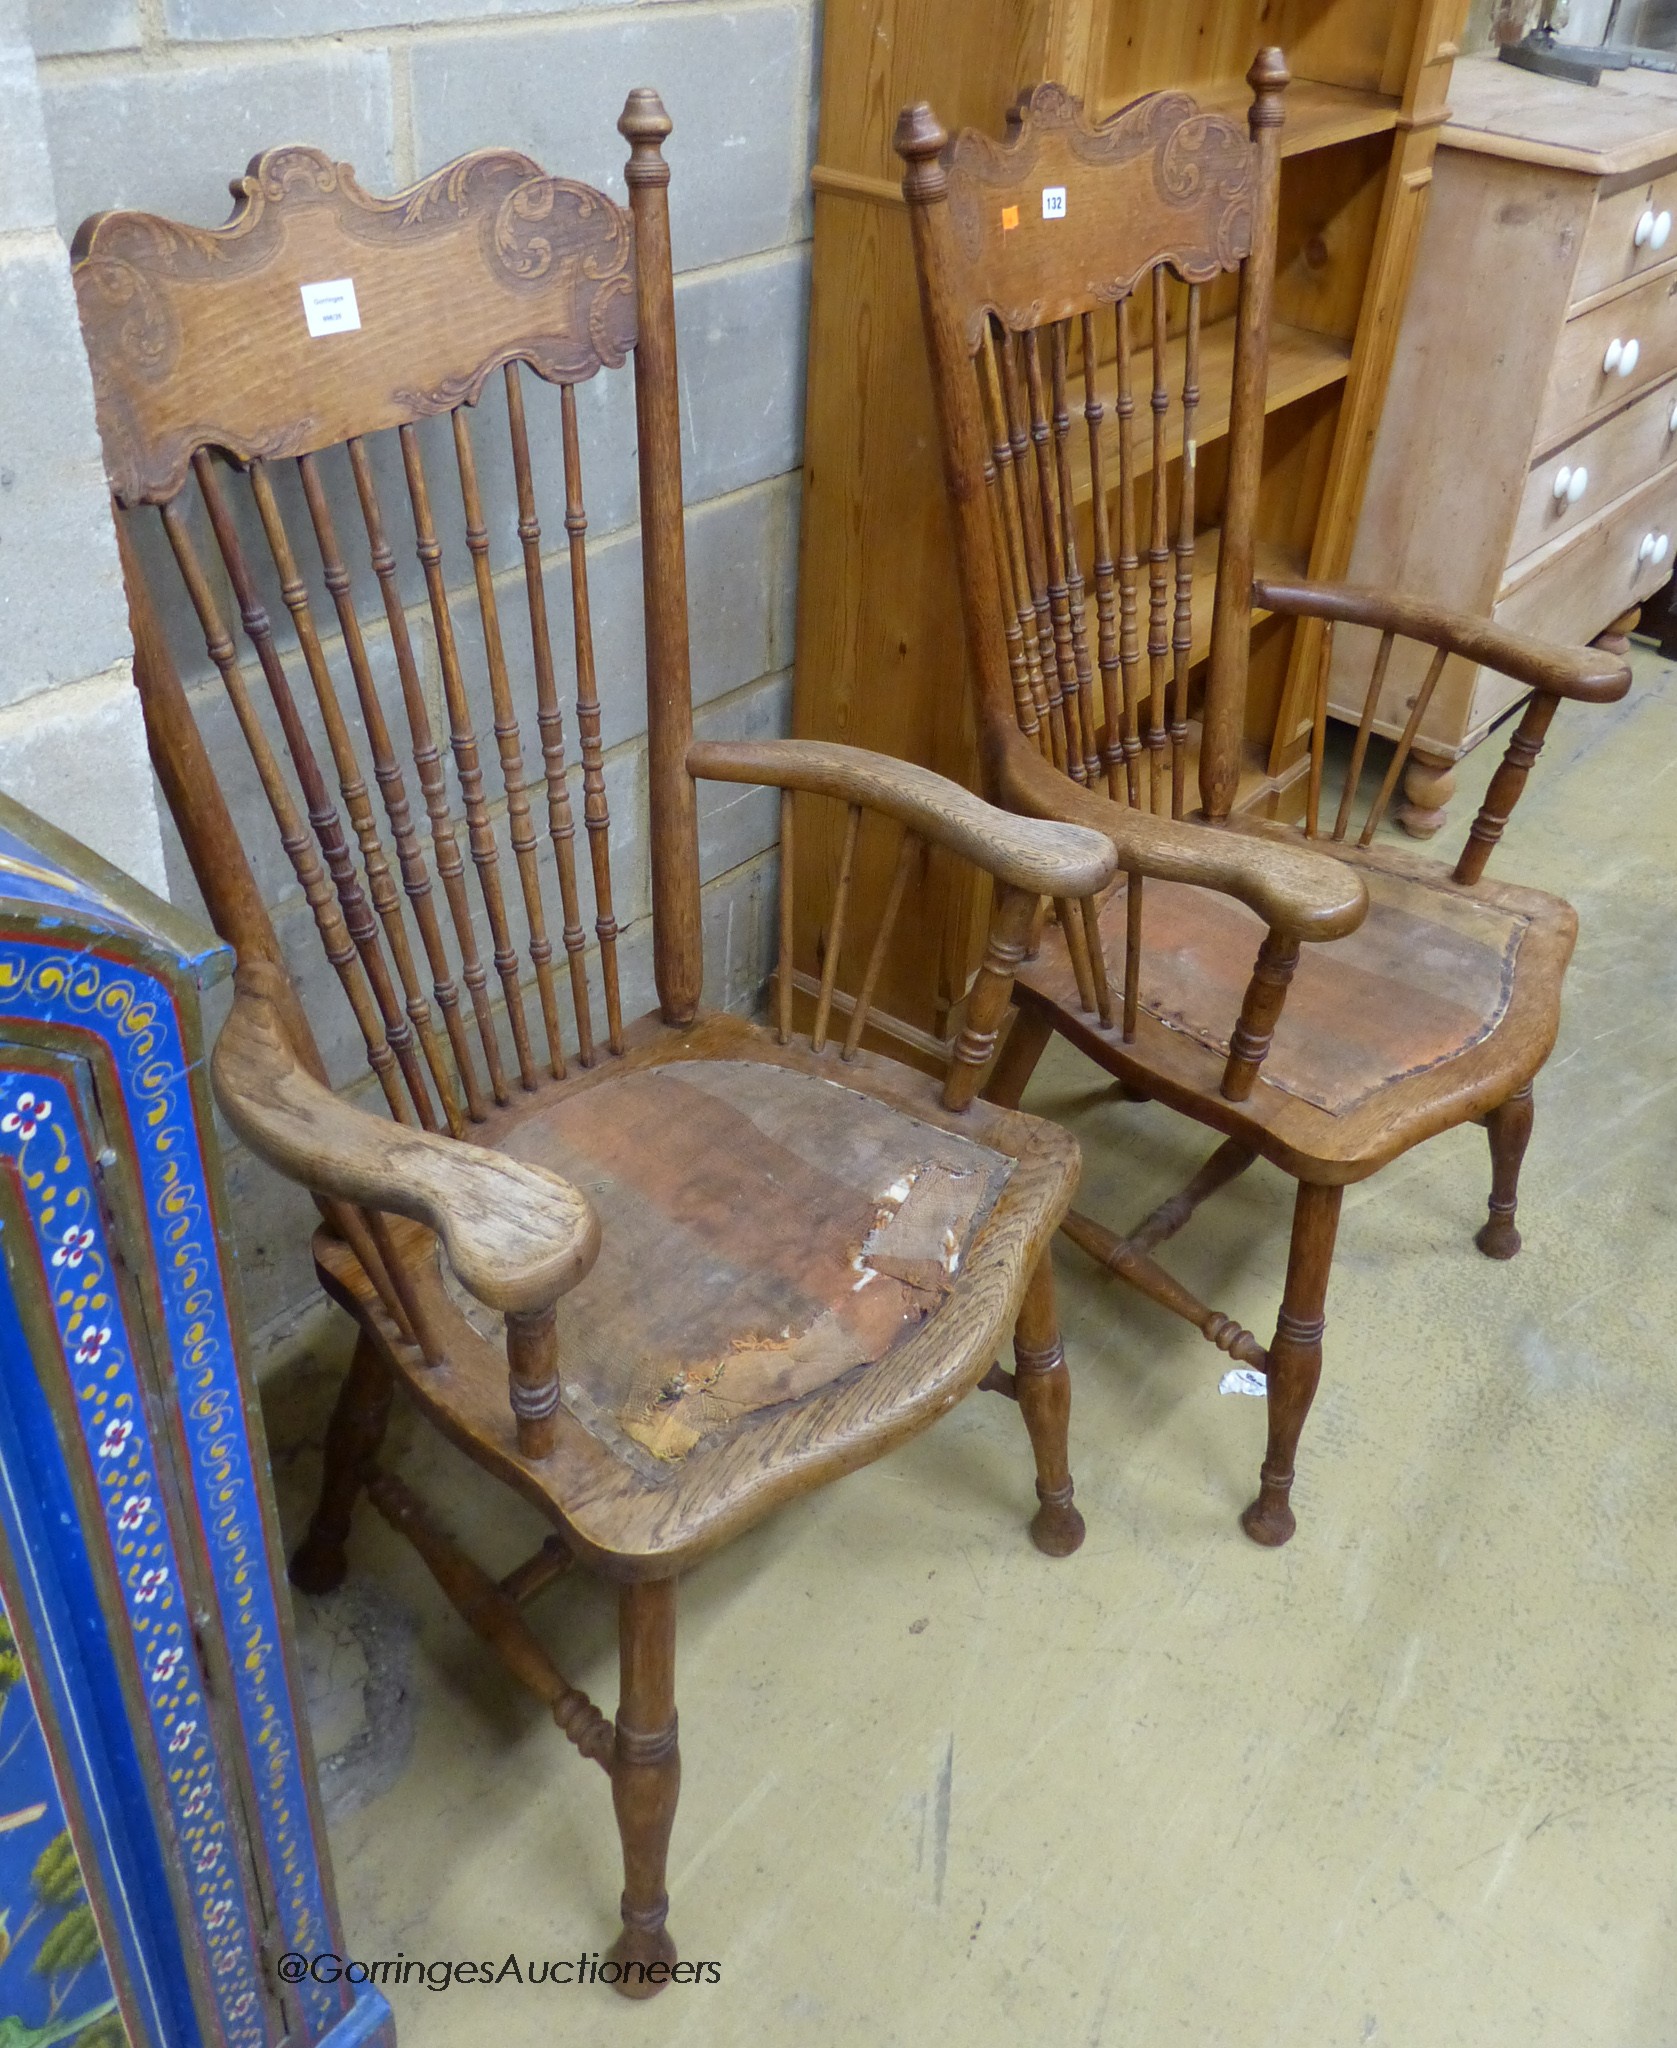 A pair of early 20th century American oak spindle back elbow chairs